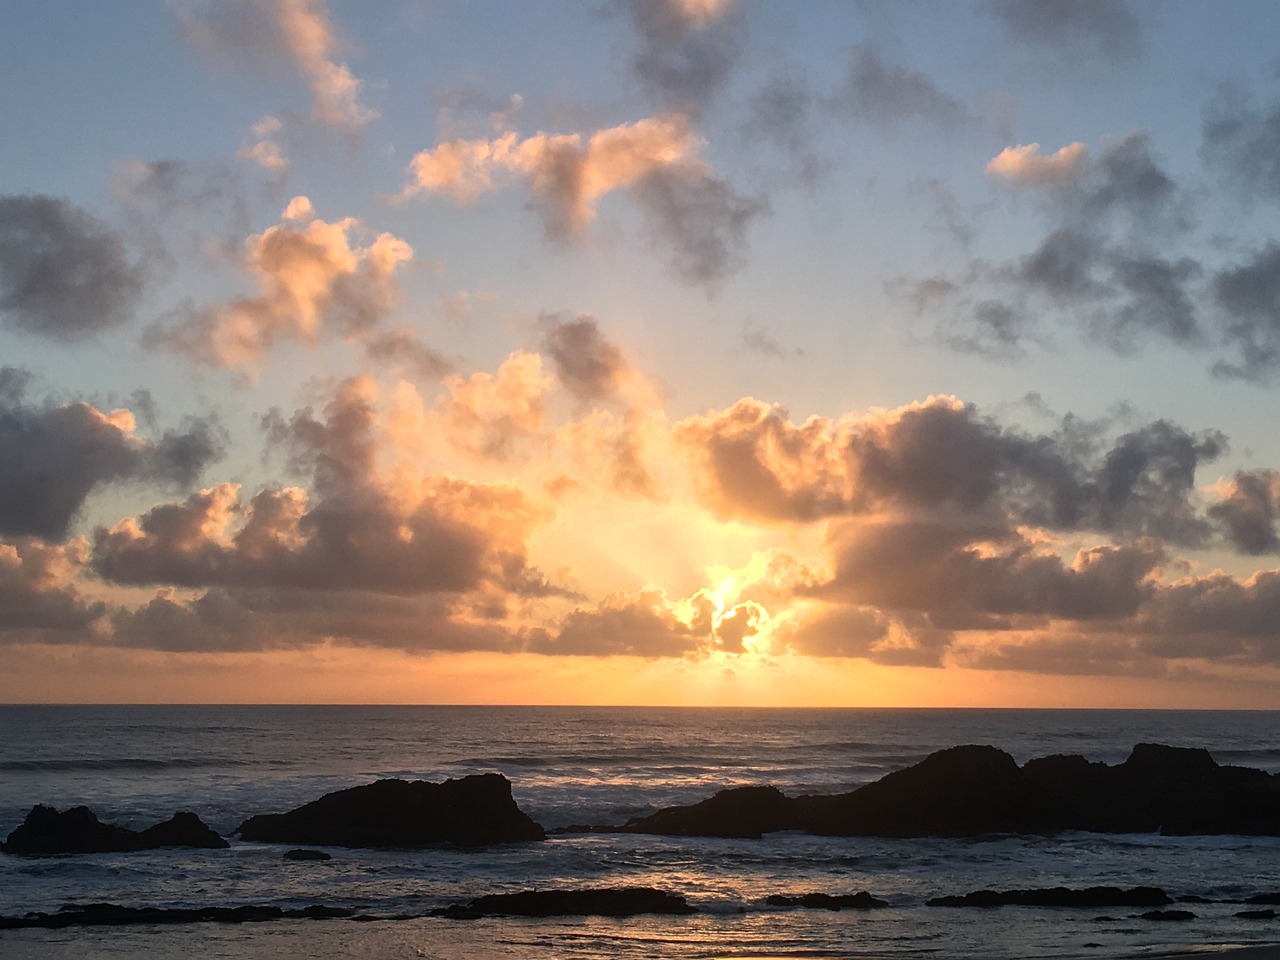 Sunset over the Pacific Ocean at Yachats in Oregon